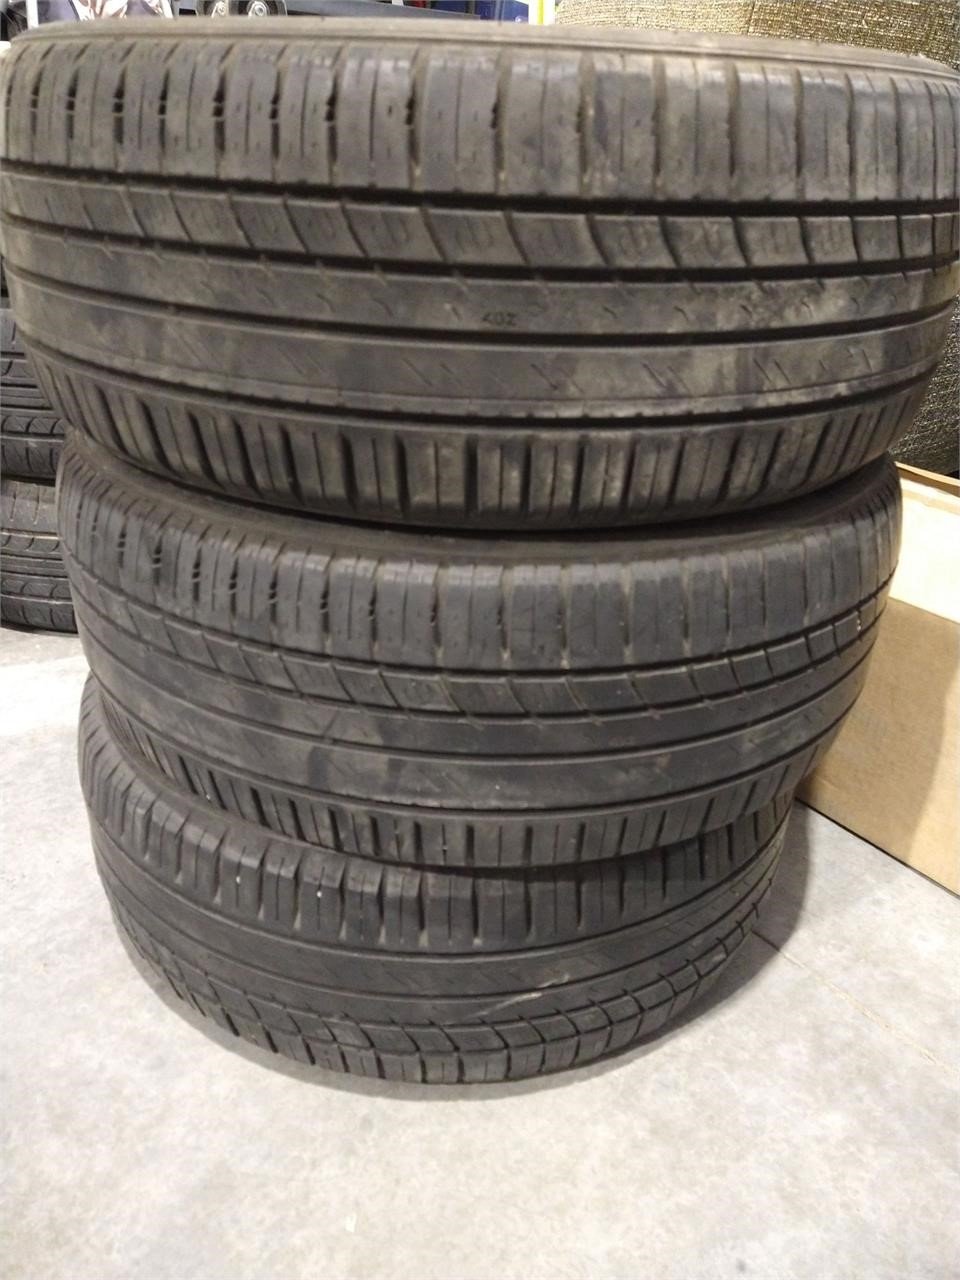 195/50 R16 Nokian Tires Lot of 3